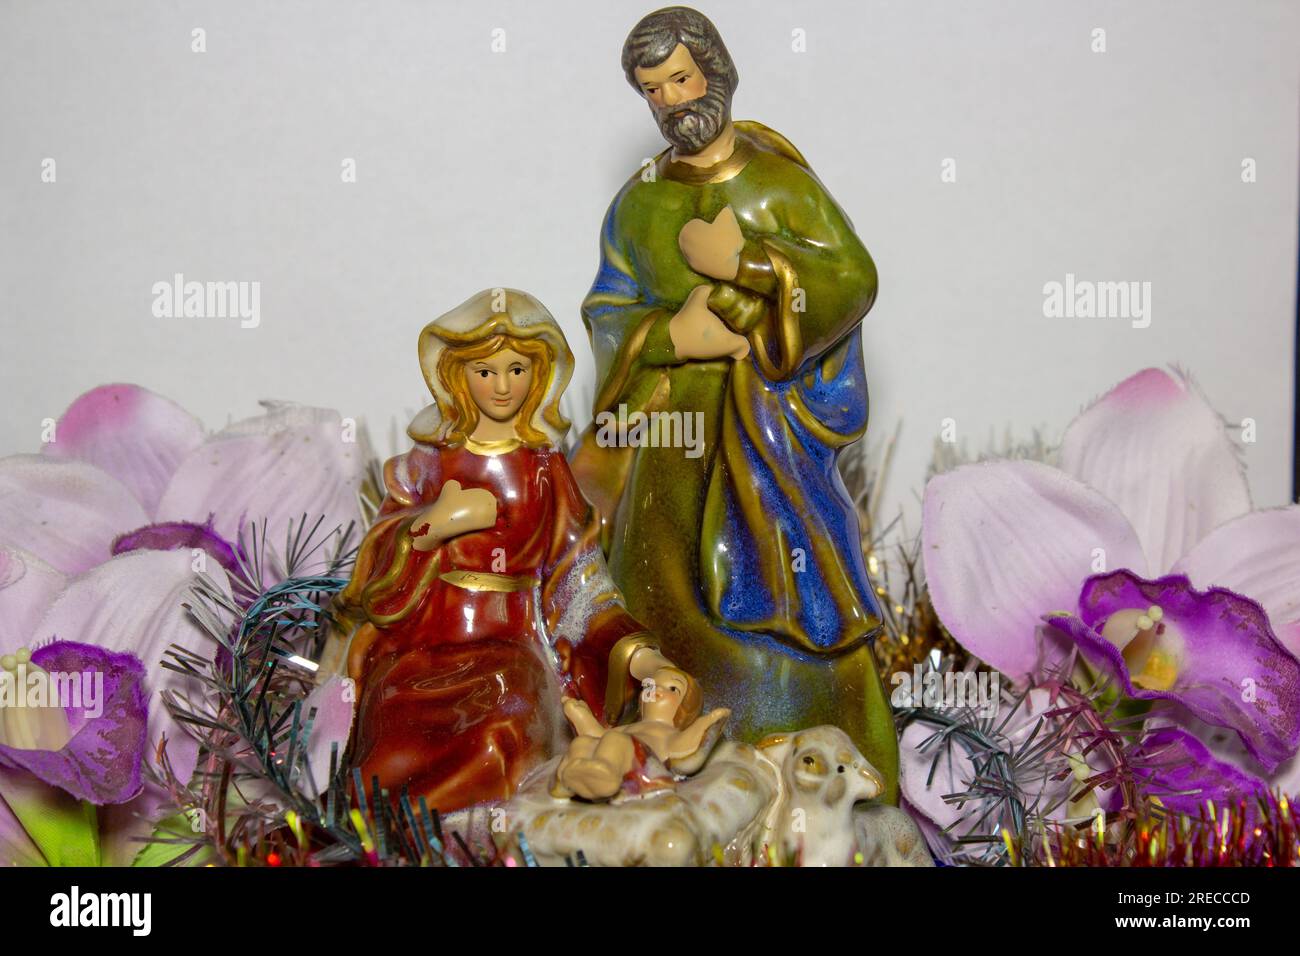 Christmas nativity scene represented with statuettes of Mary, Joseph and baby Jesus Stock Photo